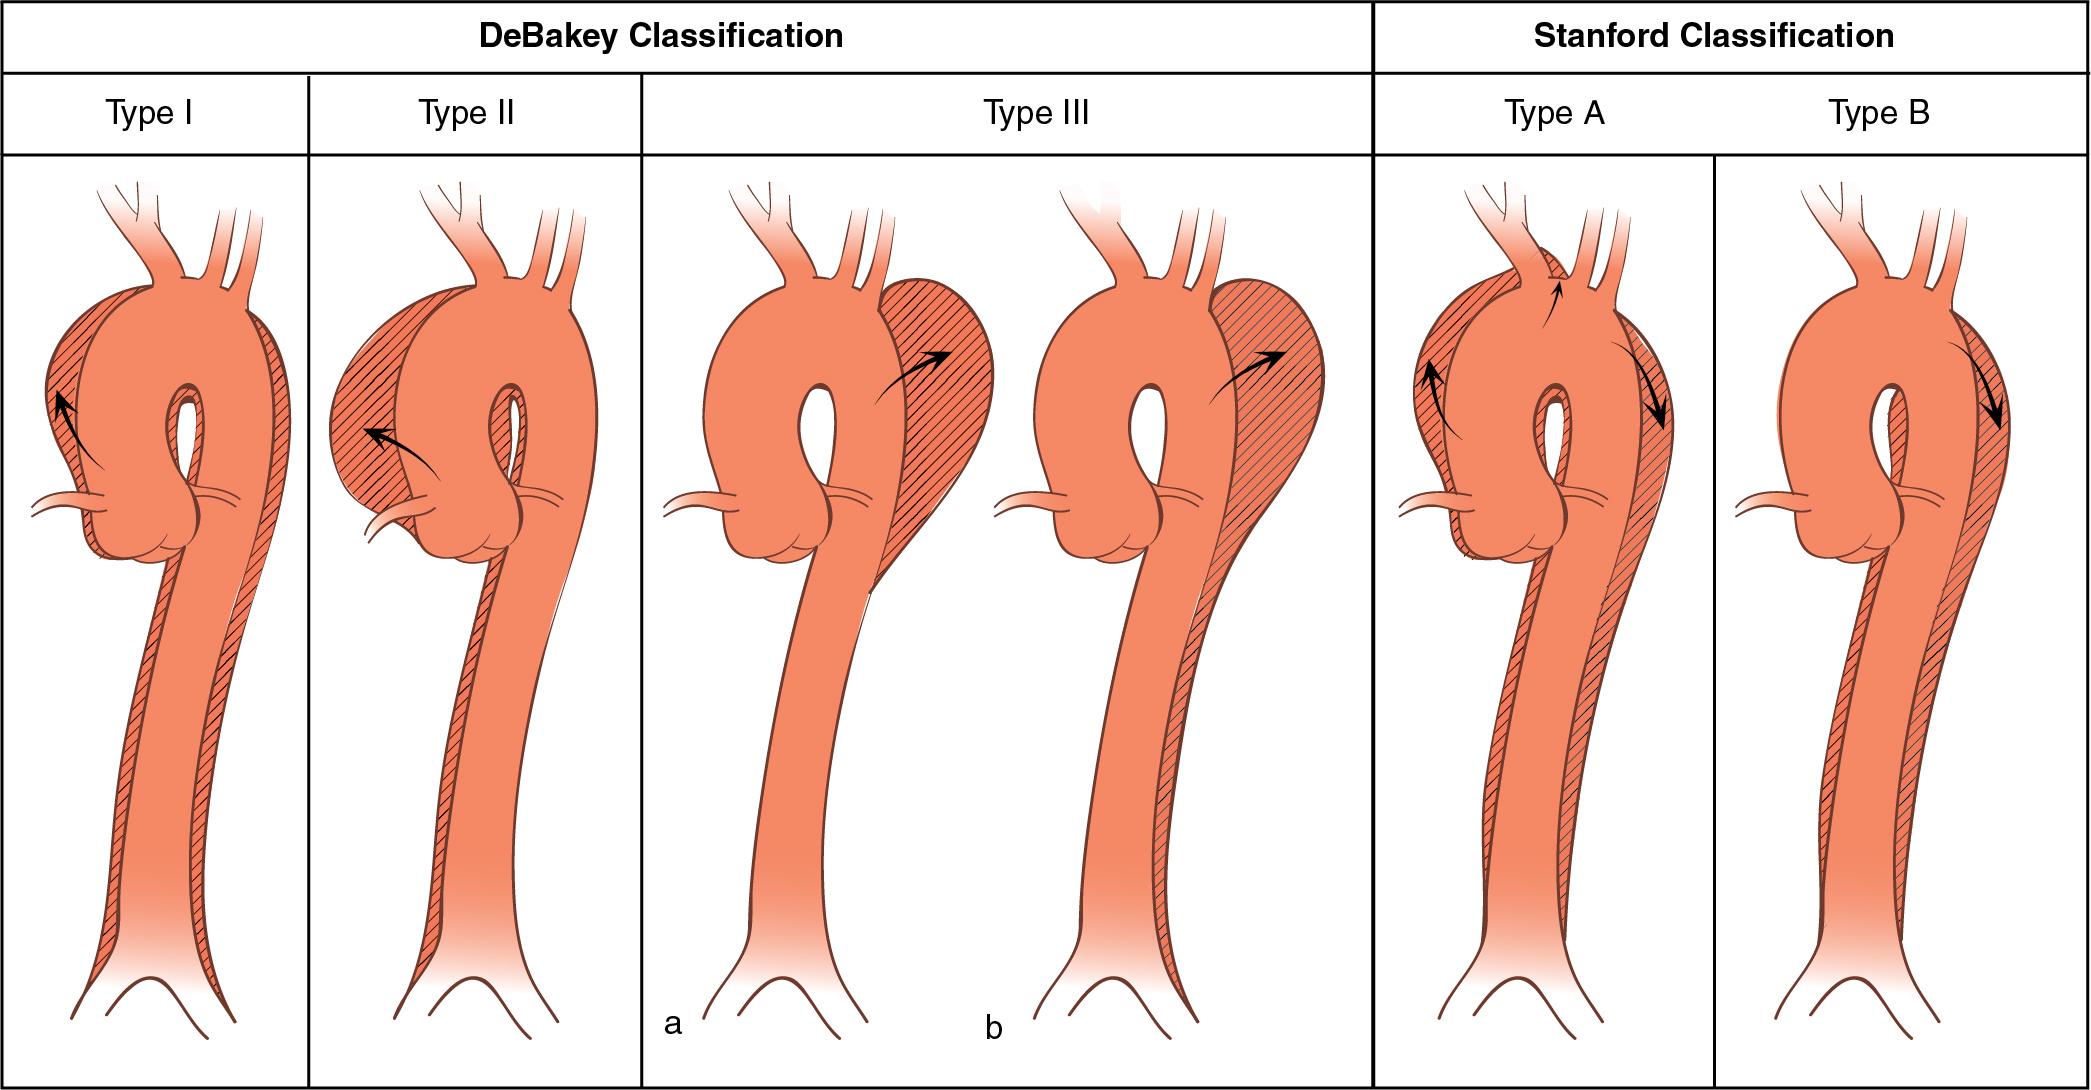 Fig. 12.4, The two most widely used classifications of aortic dissection: DeBakey and Stanford classifications. In DeBakey type I dissection the intimal tear usually originates in the proximal ascending aorta, and the dissection involves the ascending aorta and variable lengths of the aortic arch and descending thoracic and abdominal aorta. In DeBakey type II the dissection is confined to the ascending aorta. In DeBakey type III the dissection is confined to the descending thoracic aorta (type IIIa) or extends into the abdominal aorta and iliac arteries (type IIIb). Stanford type A dissection includes all cases in which the ascending aorta is involved by the dissection, with or without involvement of the arch or the descending aorta. Stanford type B includes cases in which the ascending aorta is not involved.